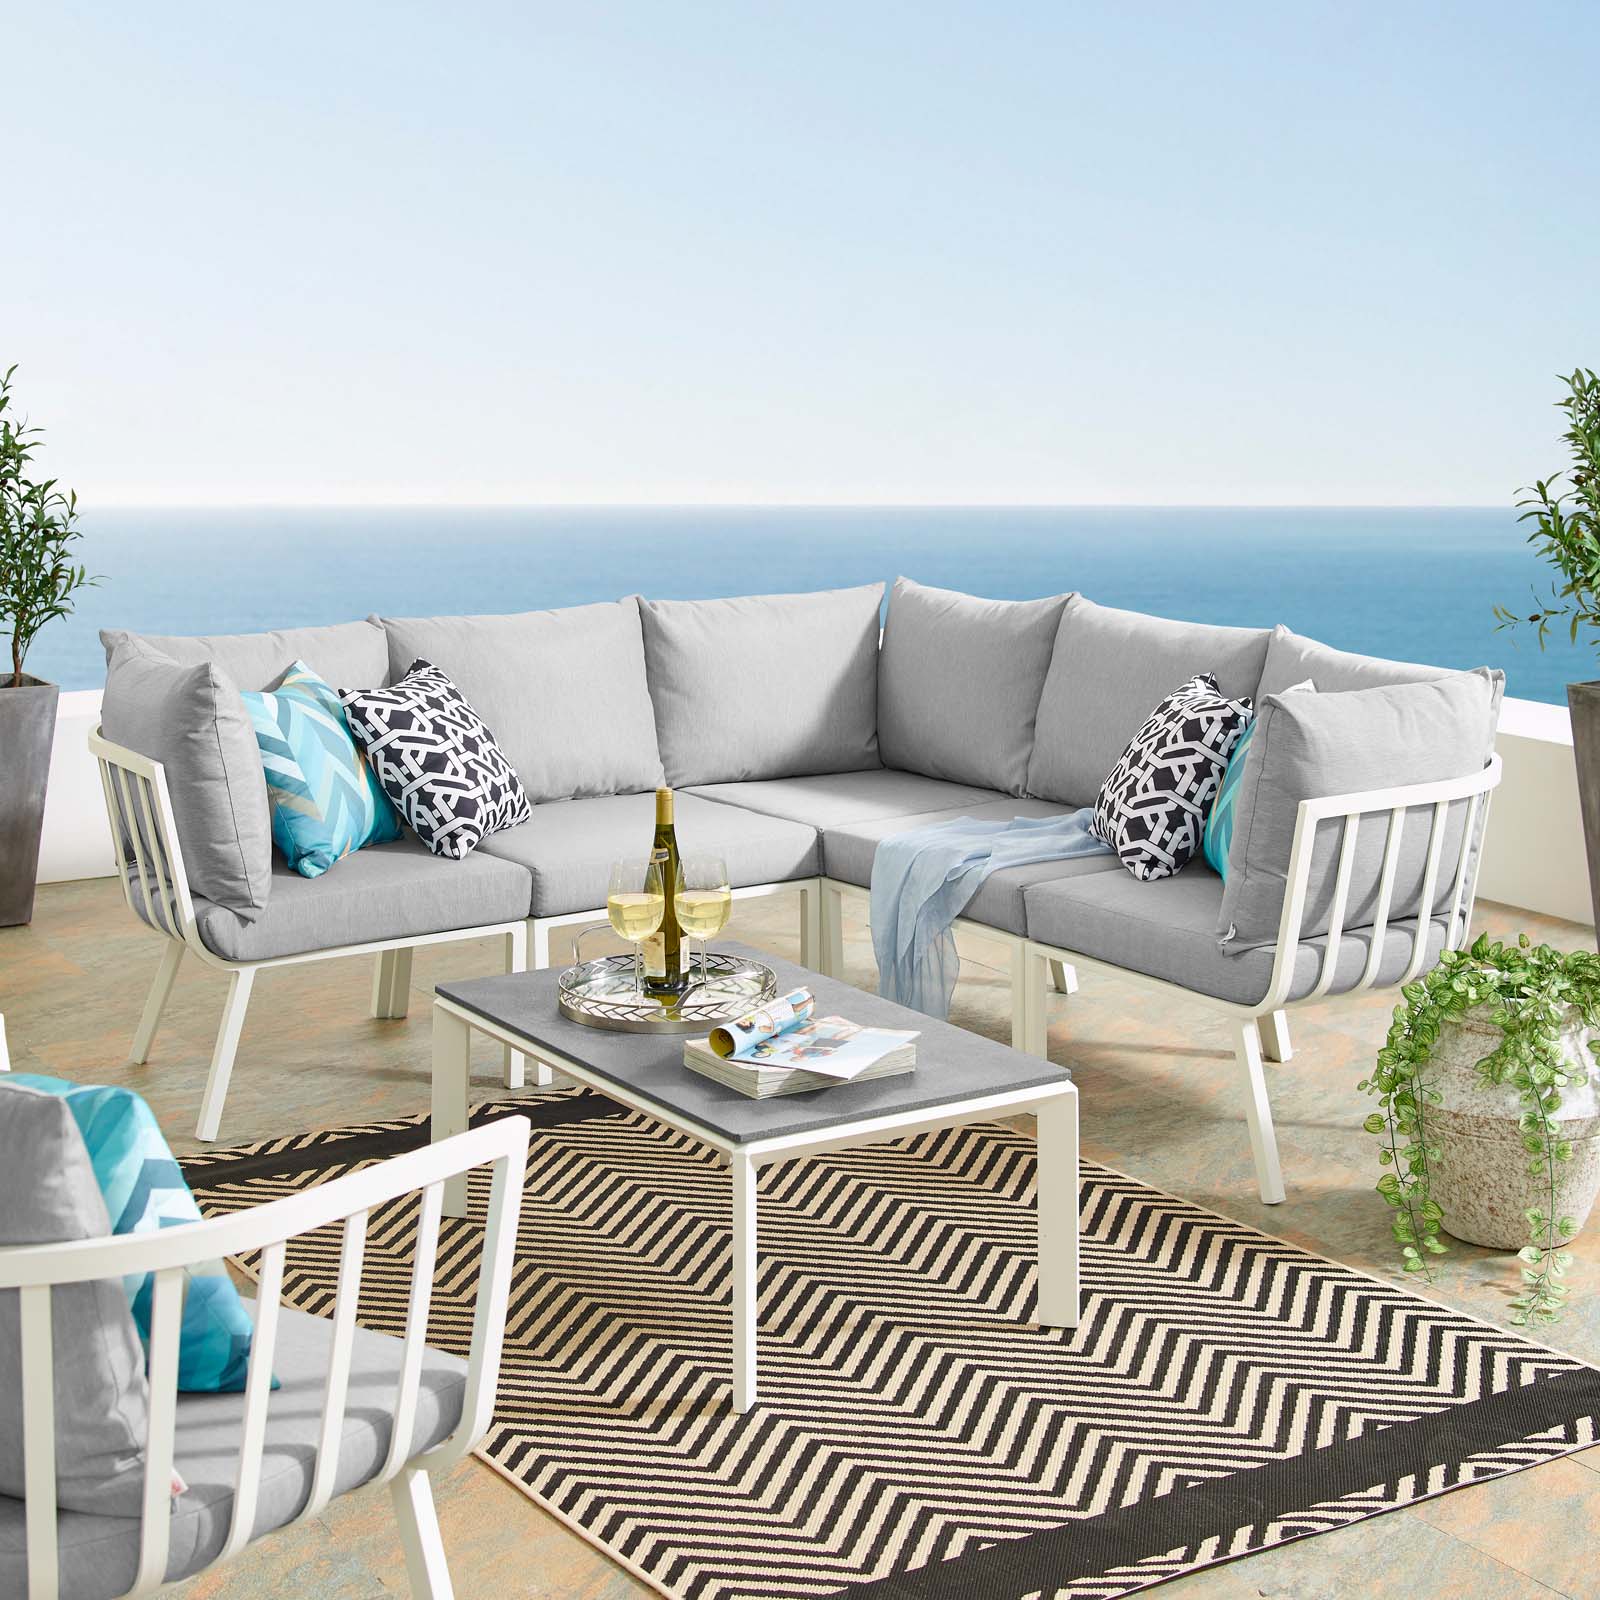 Lounge Sectional Sofa Chair Set, Aluminum, Metal, Steel, White Grey Gray, Modern Contemporary Urban Design, Outdoor Patio Balcony Cafe Bistro Garden Furniture Hotel Hospitality - image 3 of 10